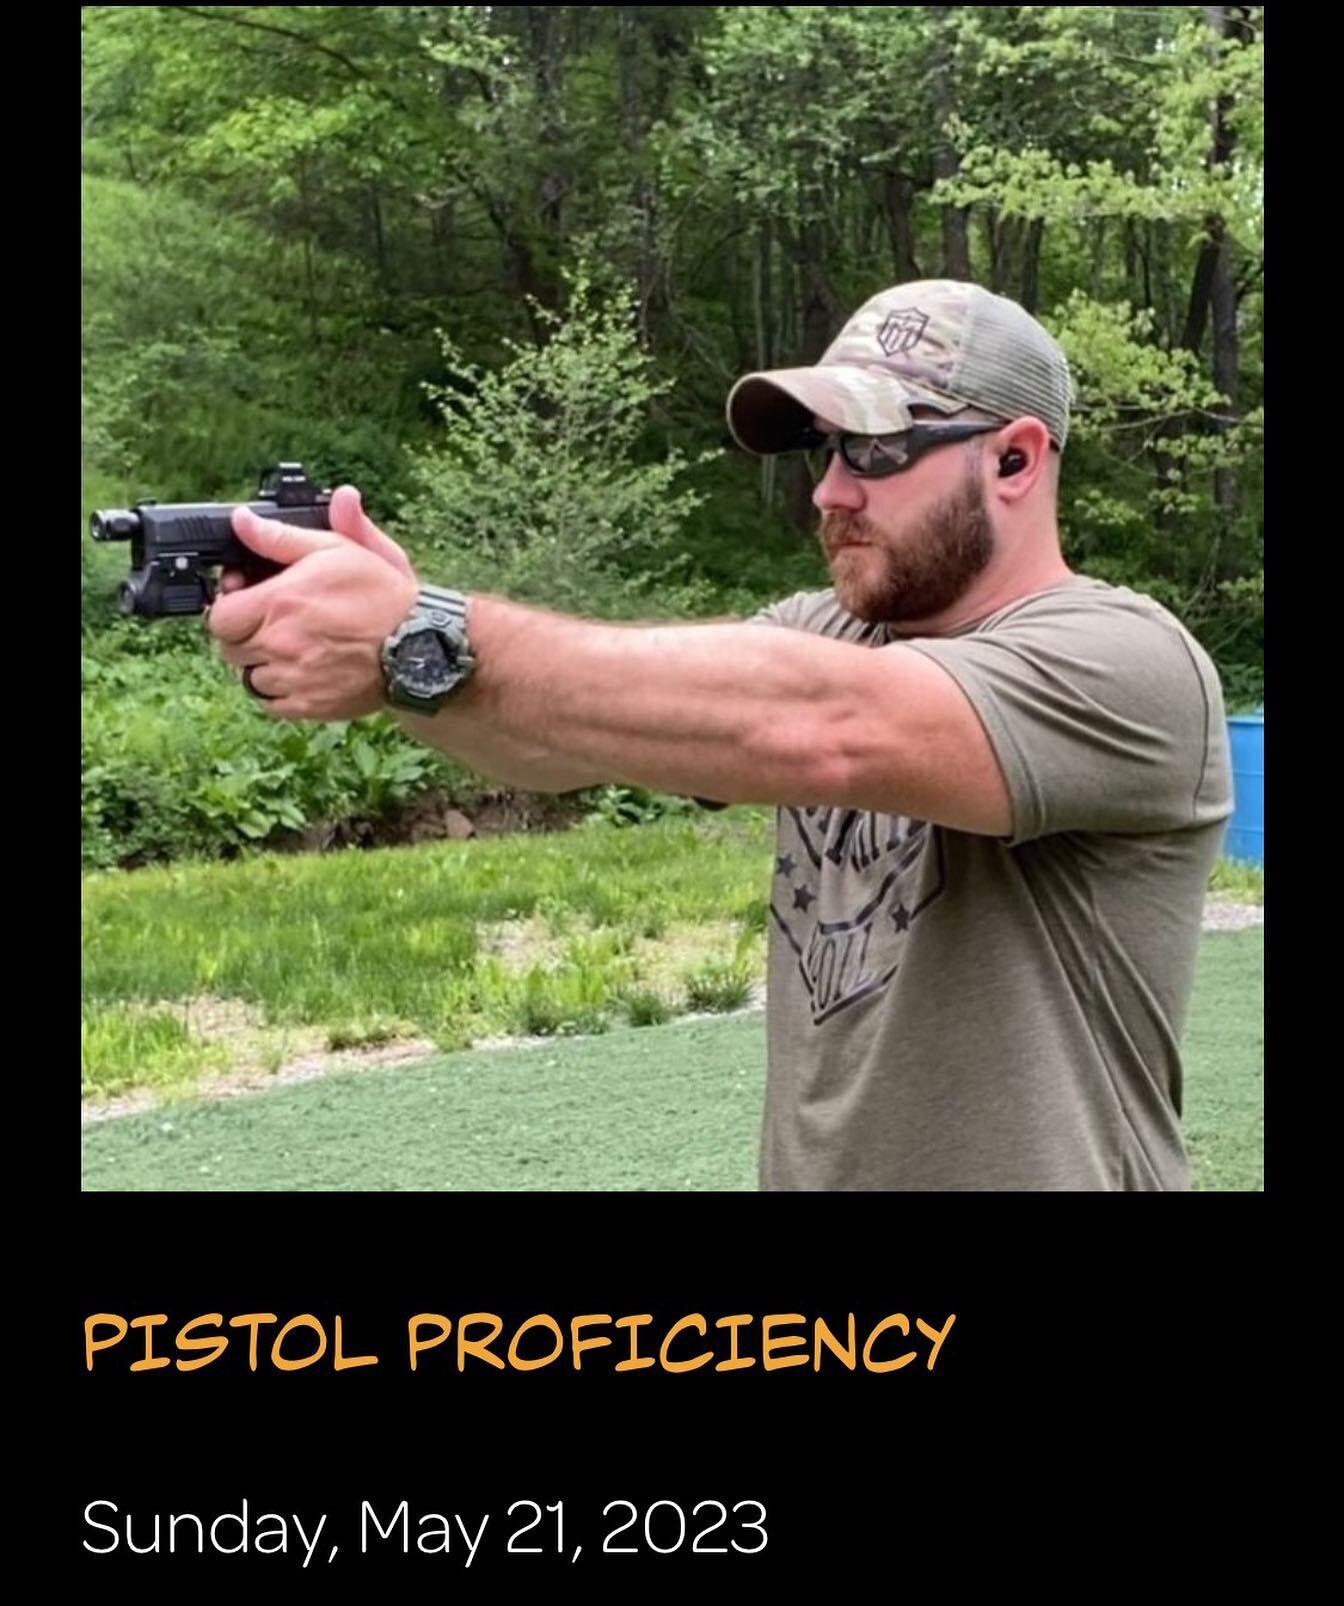 Still have a few spots available. Pistol Proficiency this Sunday, 05/21, 9 to 12
Register through the link in our bio or by clicking on the link below 👇🏼 

https://www.triggermikes.com/courses/pistol-proficiency-05/21